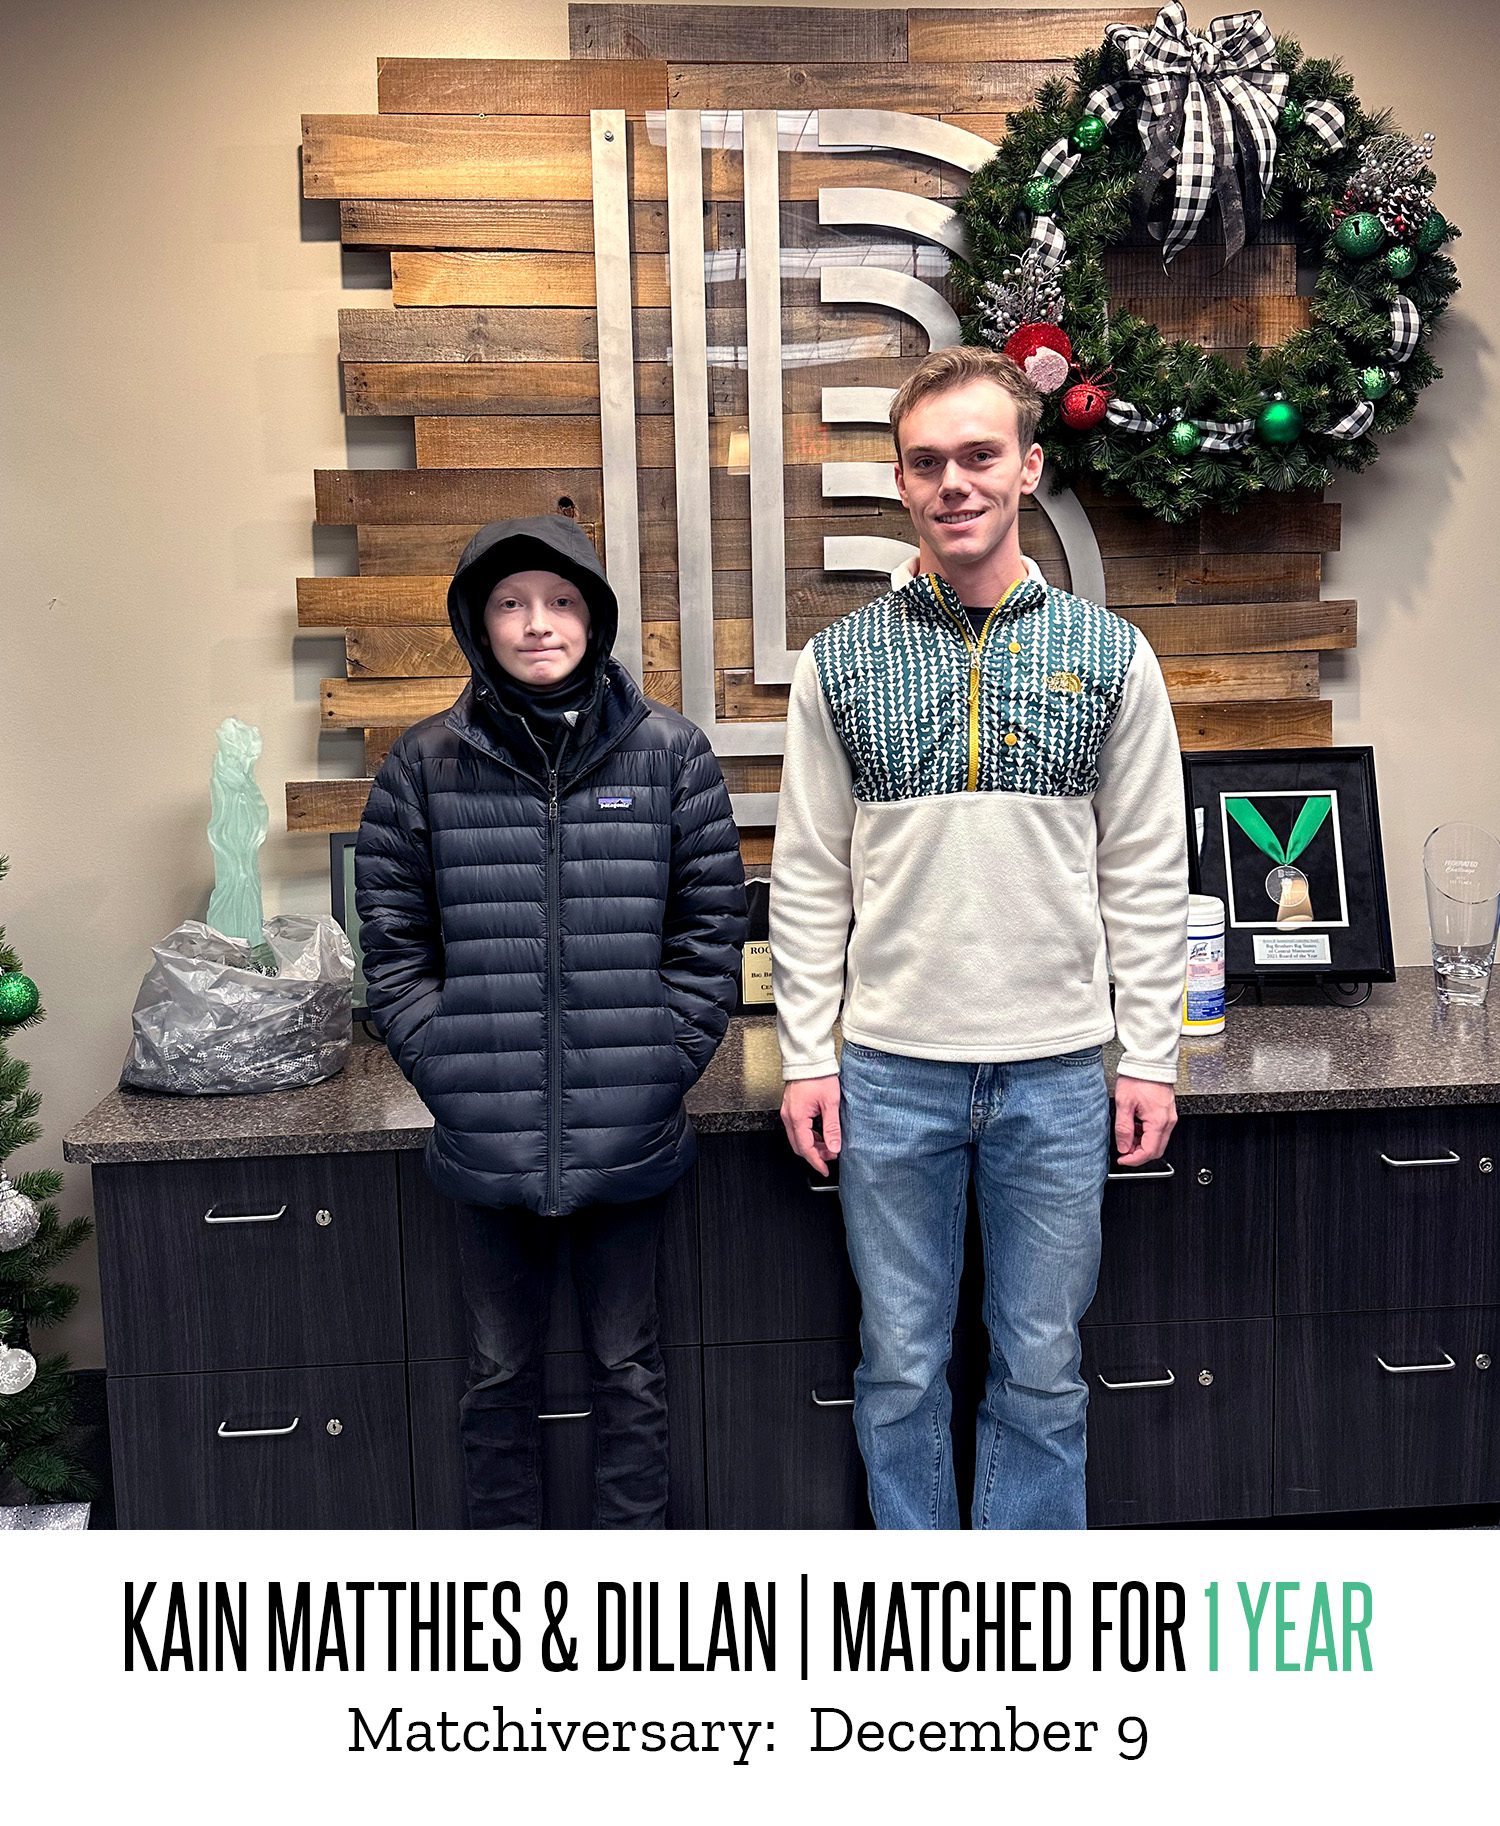 Kain Matthies and Dillan pose for a picture after being matched for one year